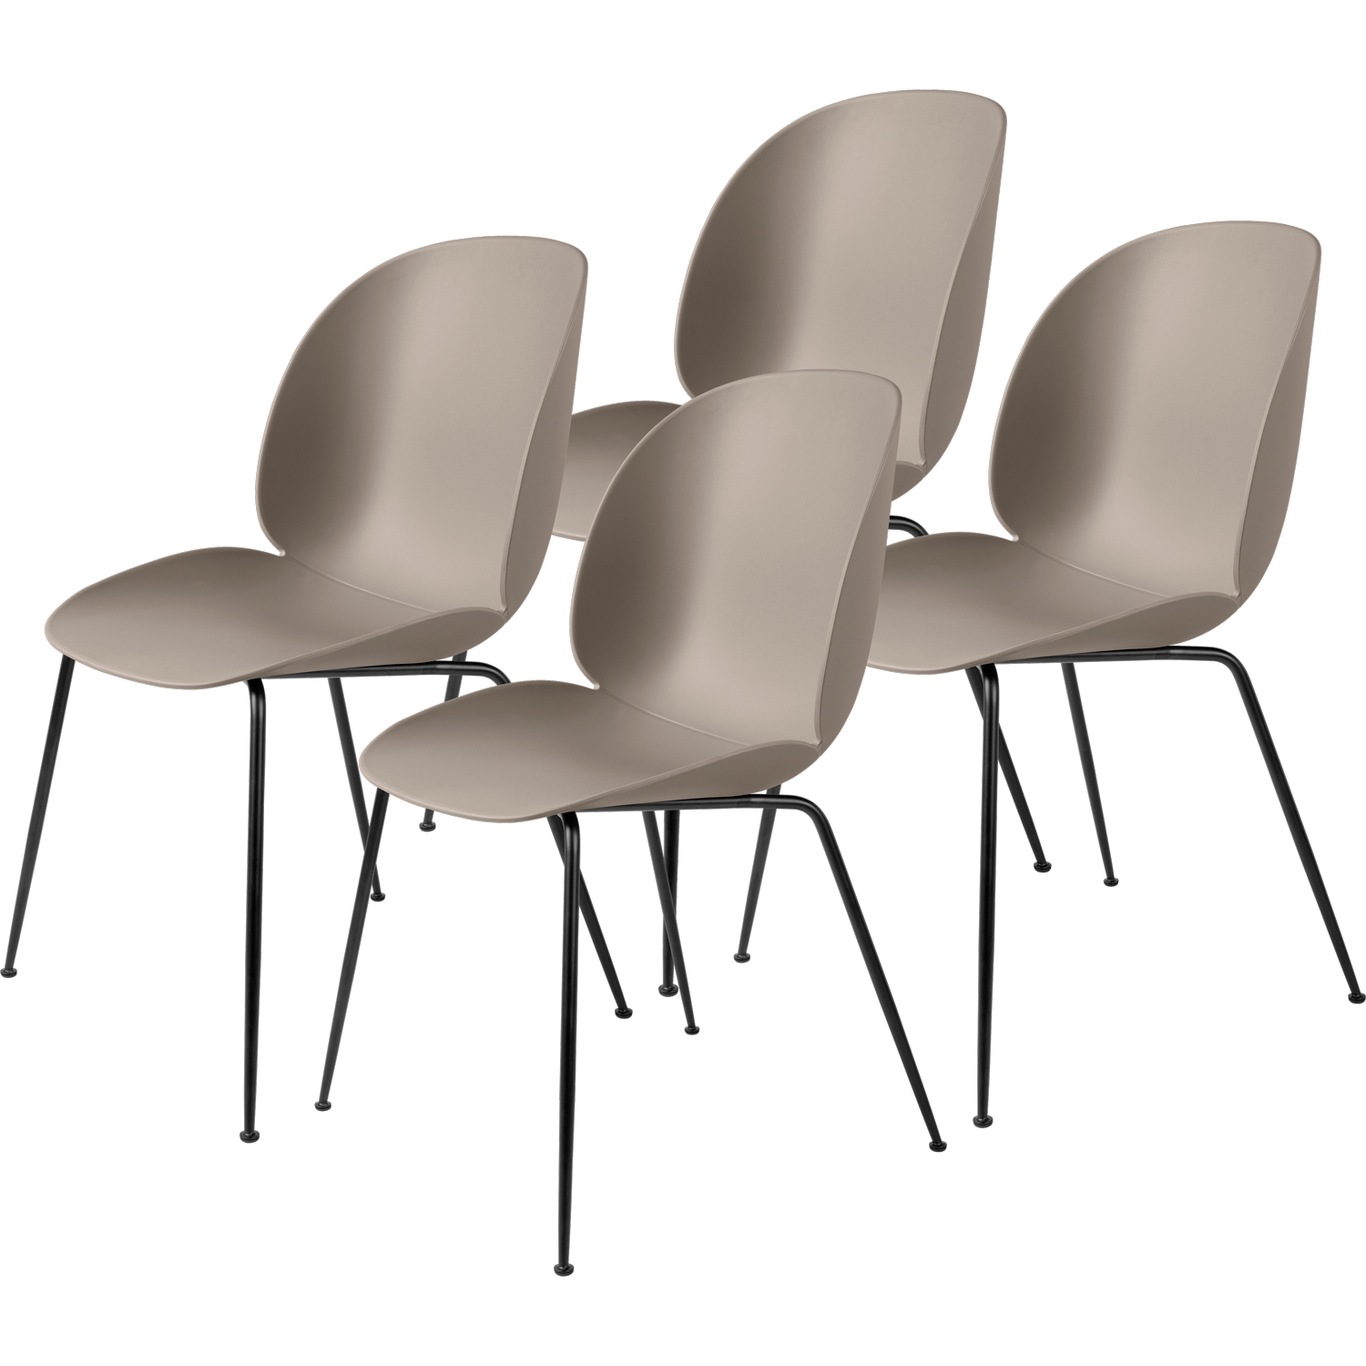 Beetle Dining Chair Unupholstered, Conic Base Black, Set Of 4, New Beige